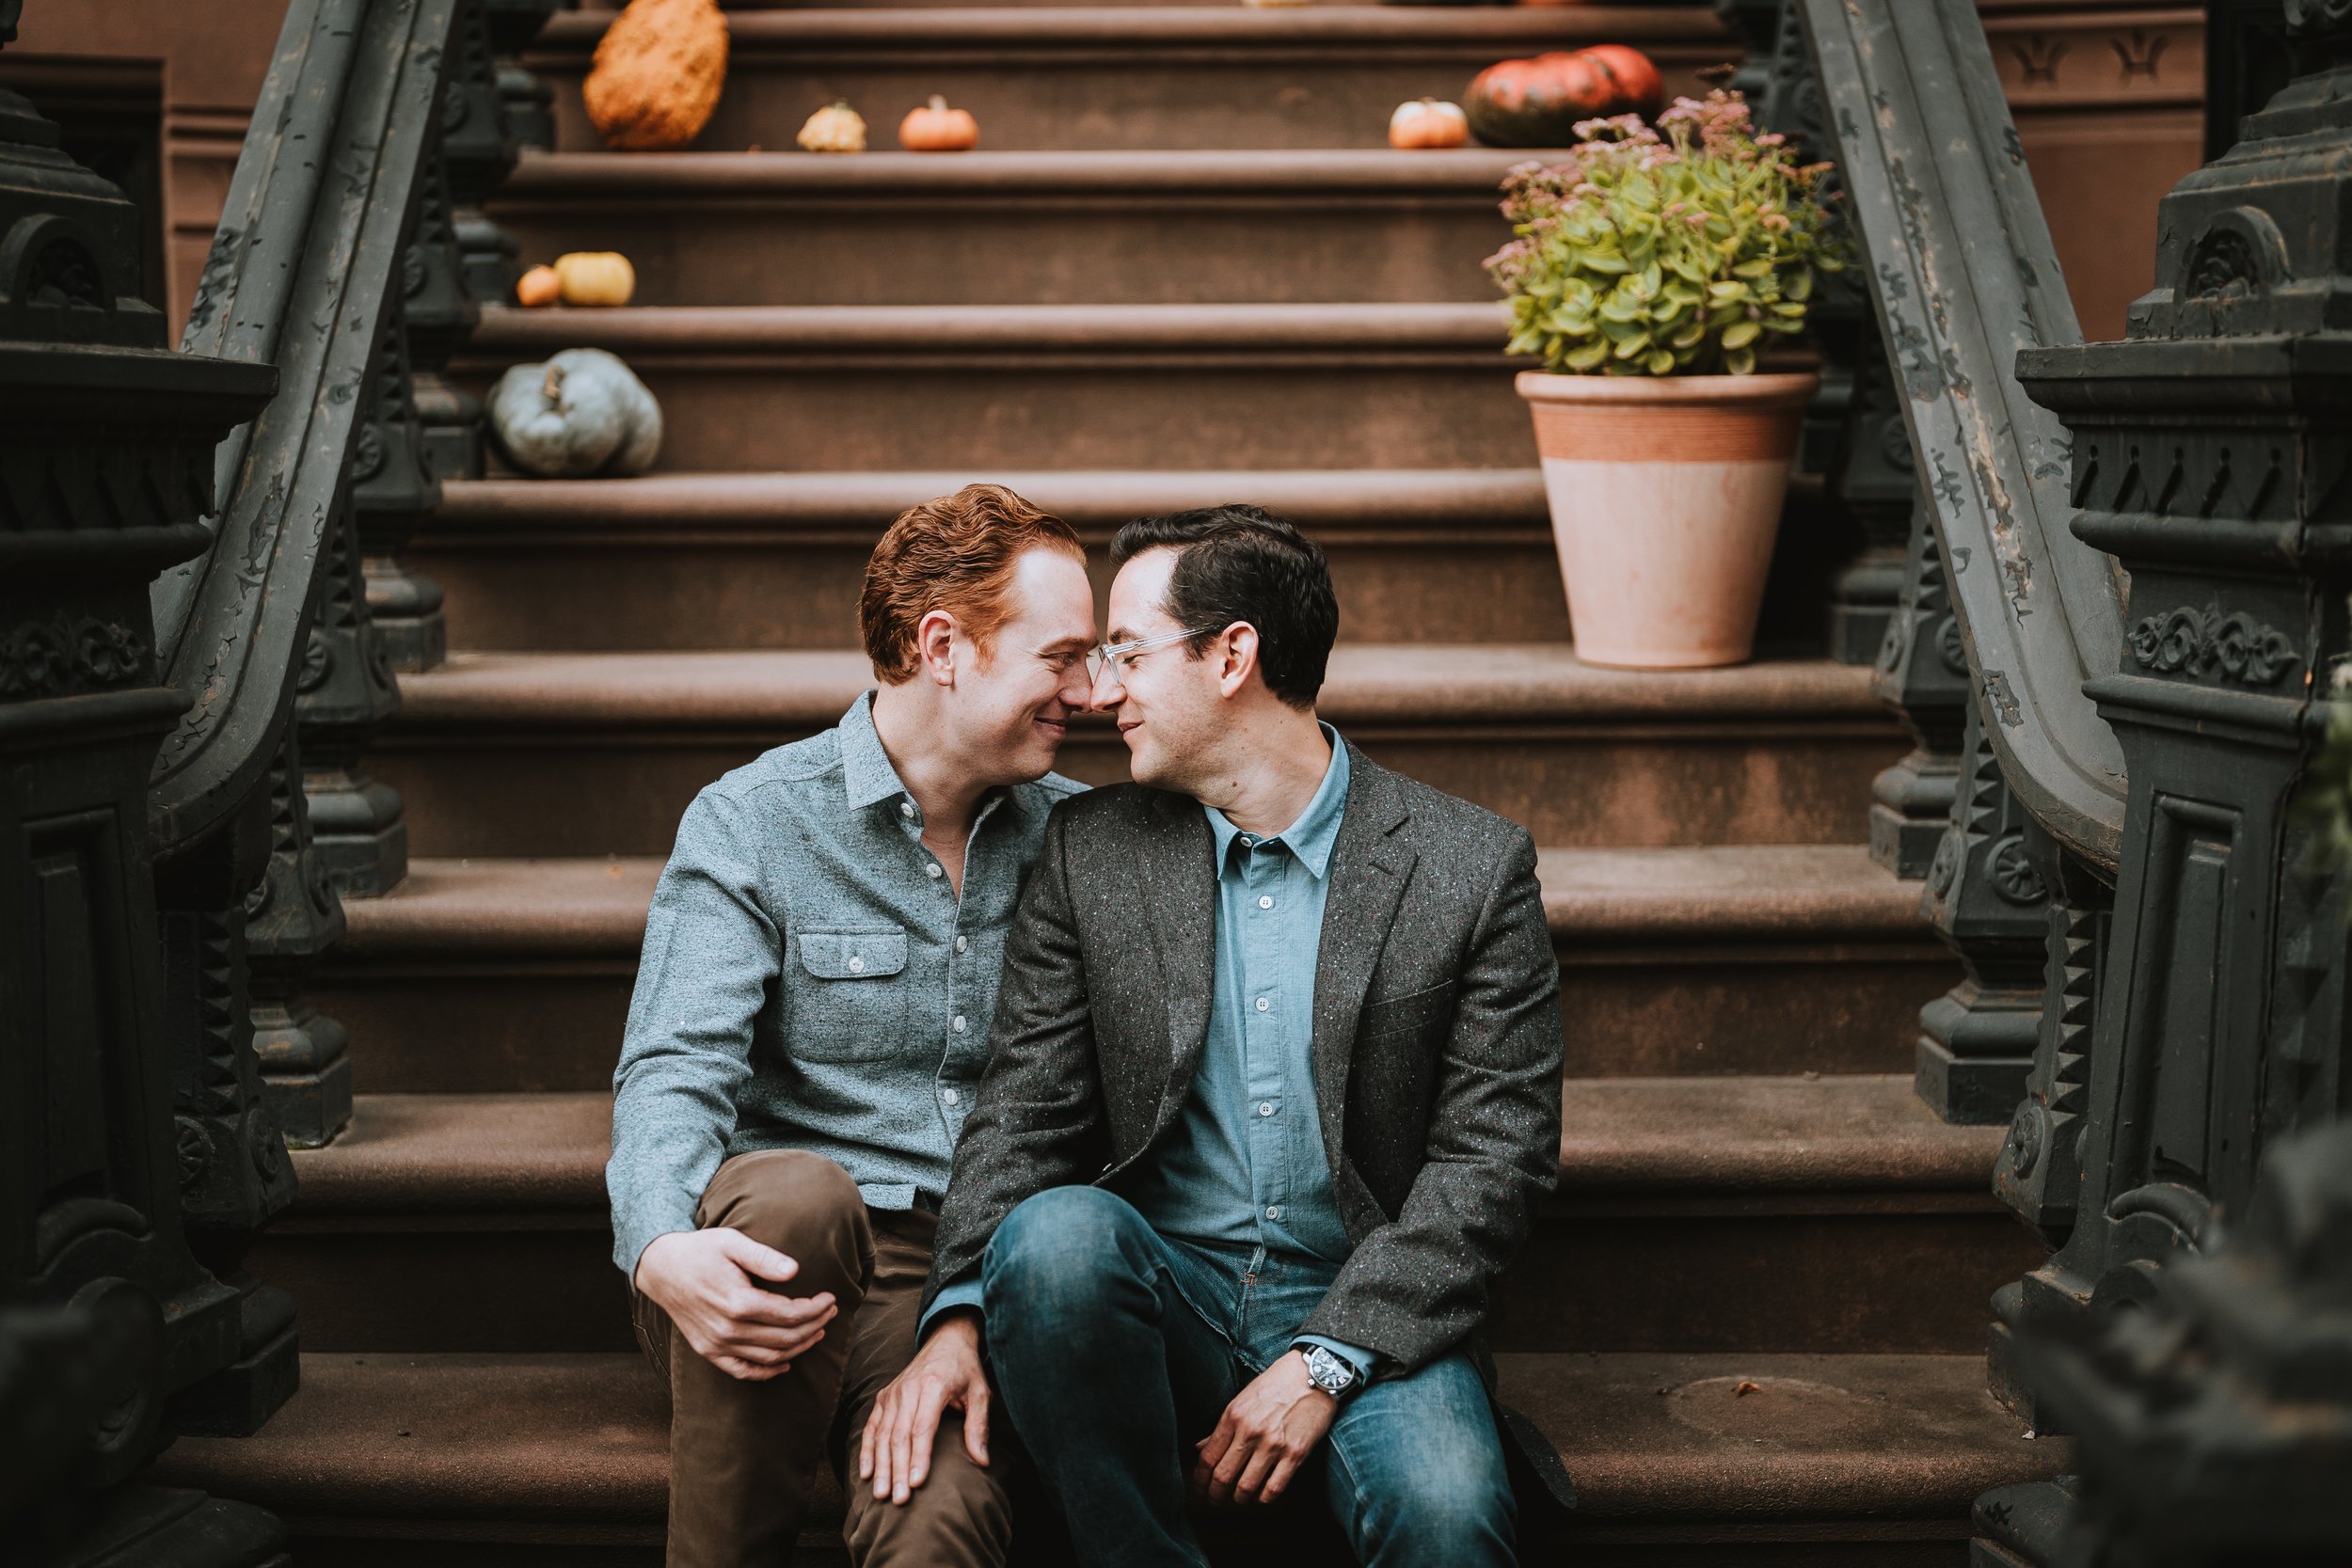 PARK SLOPE GAY ENGAGEMENT SHOOT